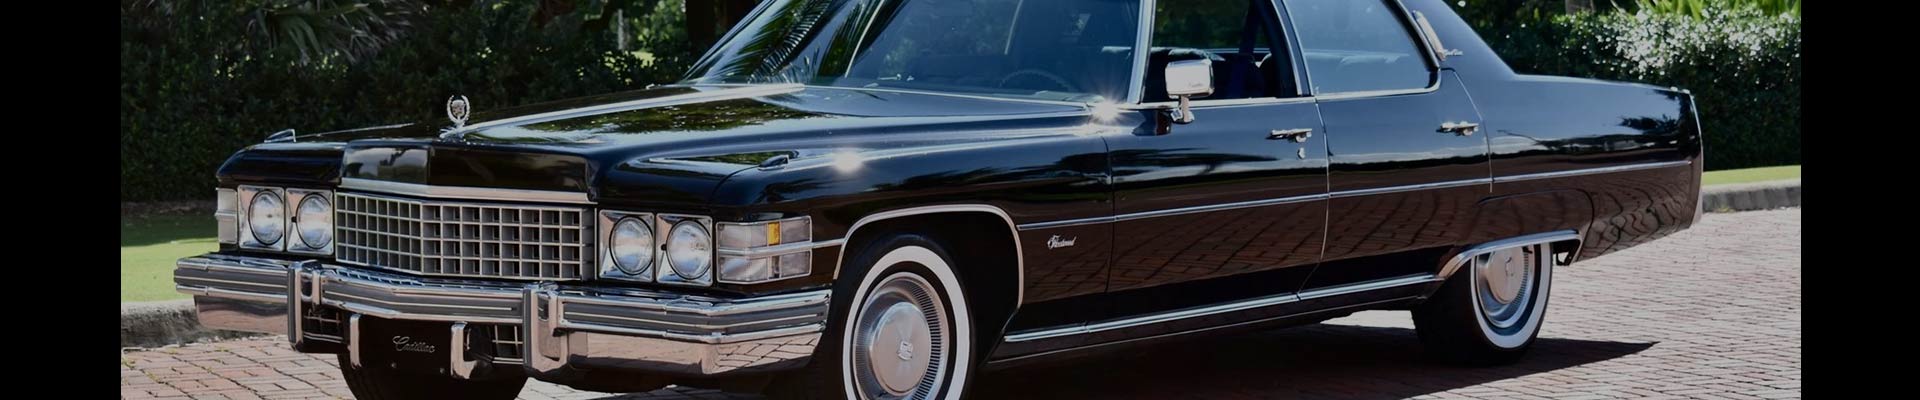 Shop Genuine OE Parts for Cadillac Fleetwood